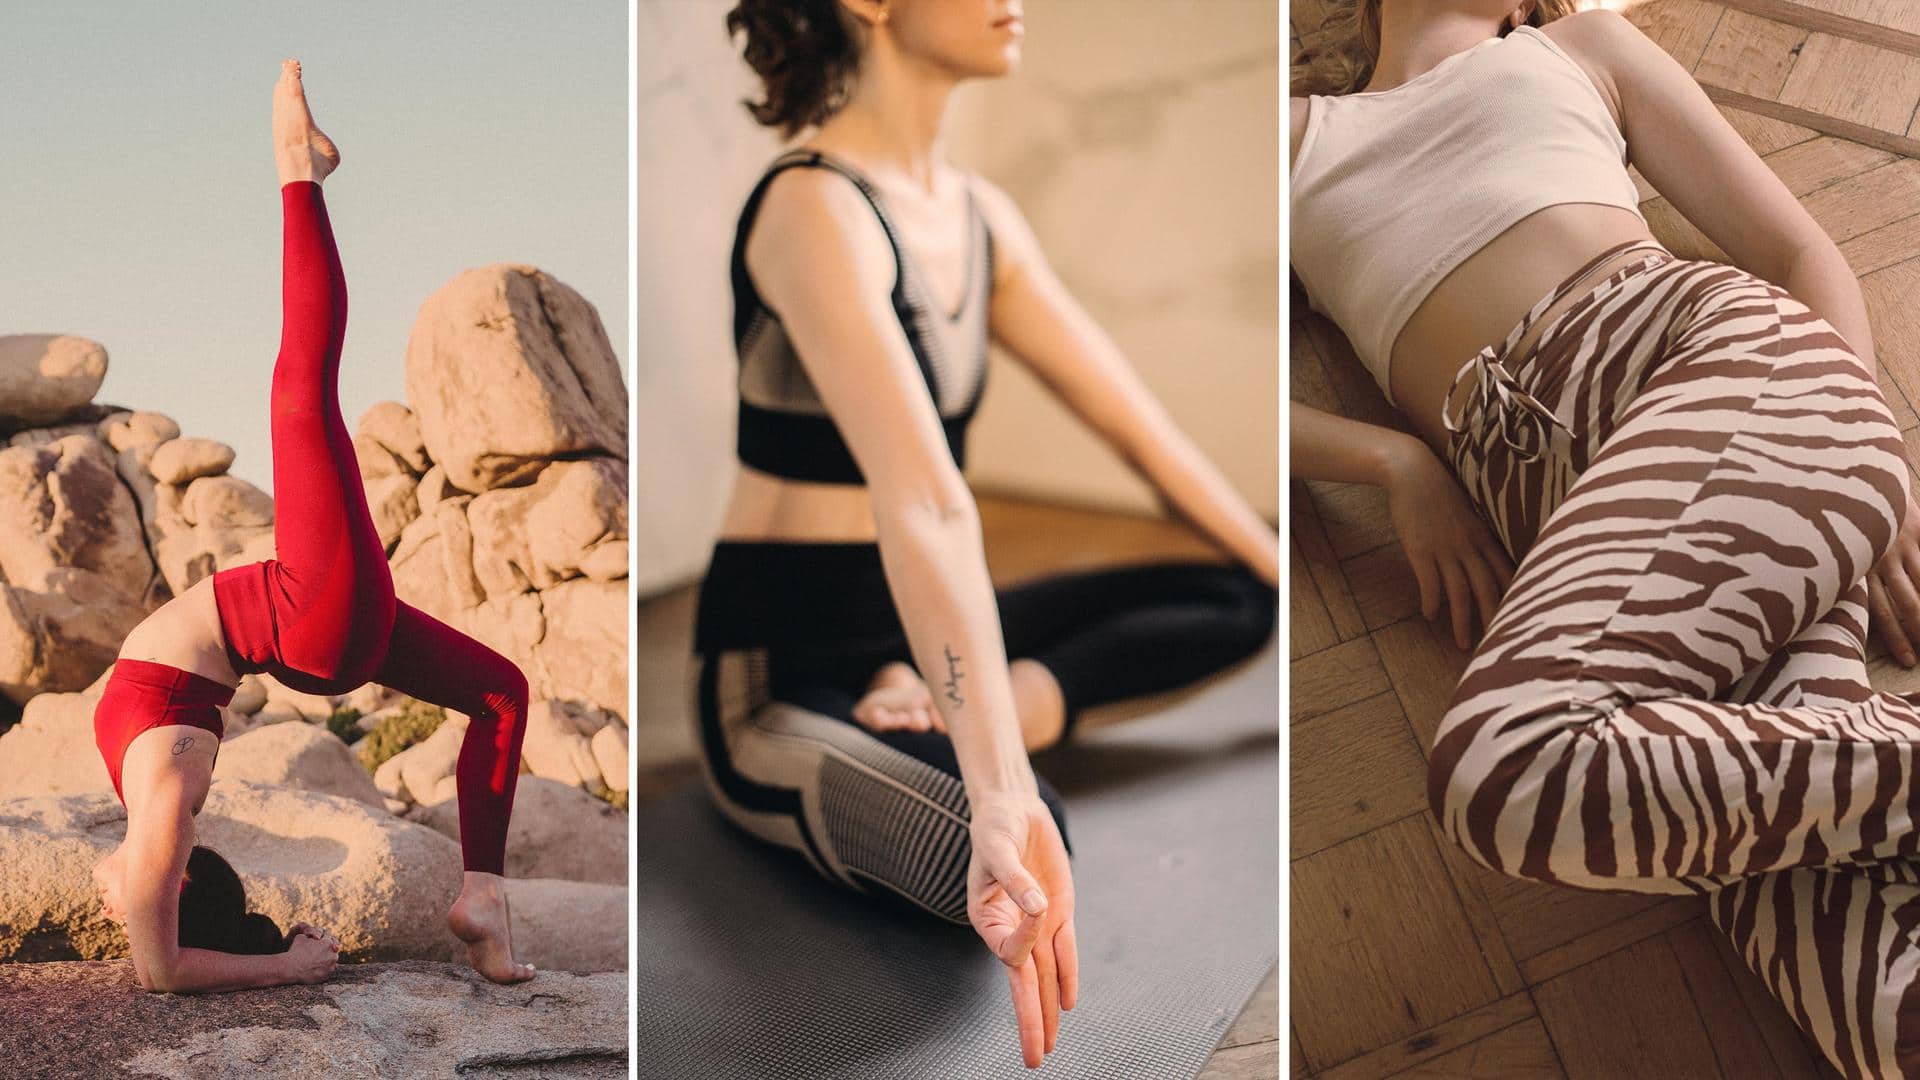 How to style your yoga pants for daily wear